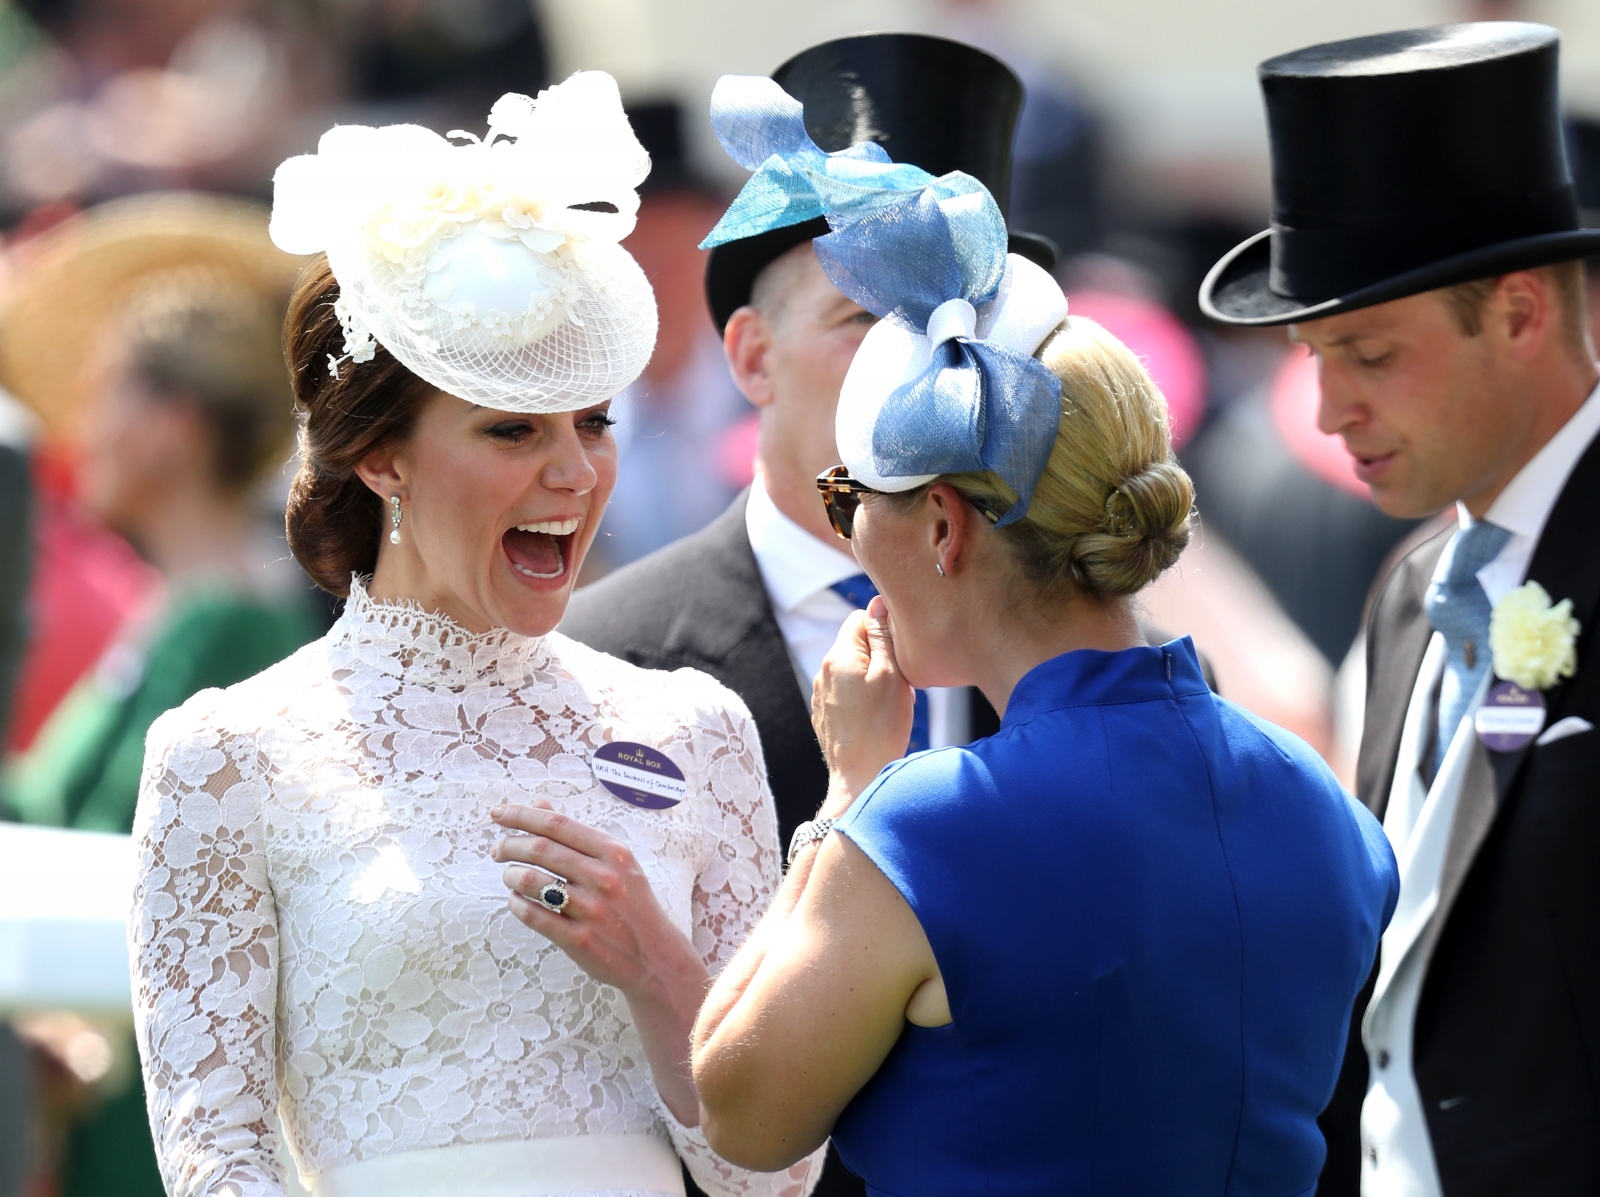 No horsing around: Kate Middleton plays it safe in nearly-identical Royal Ascot outfit to 2016's